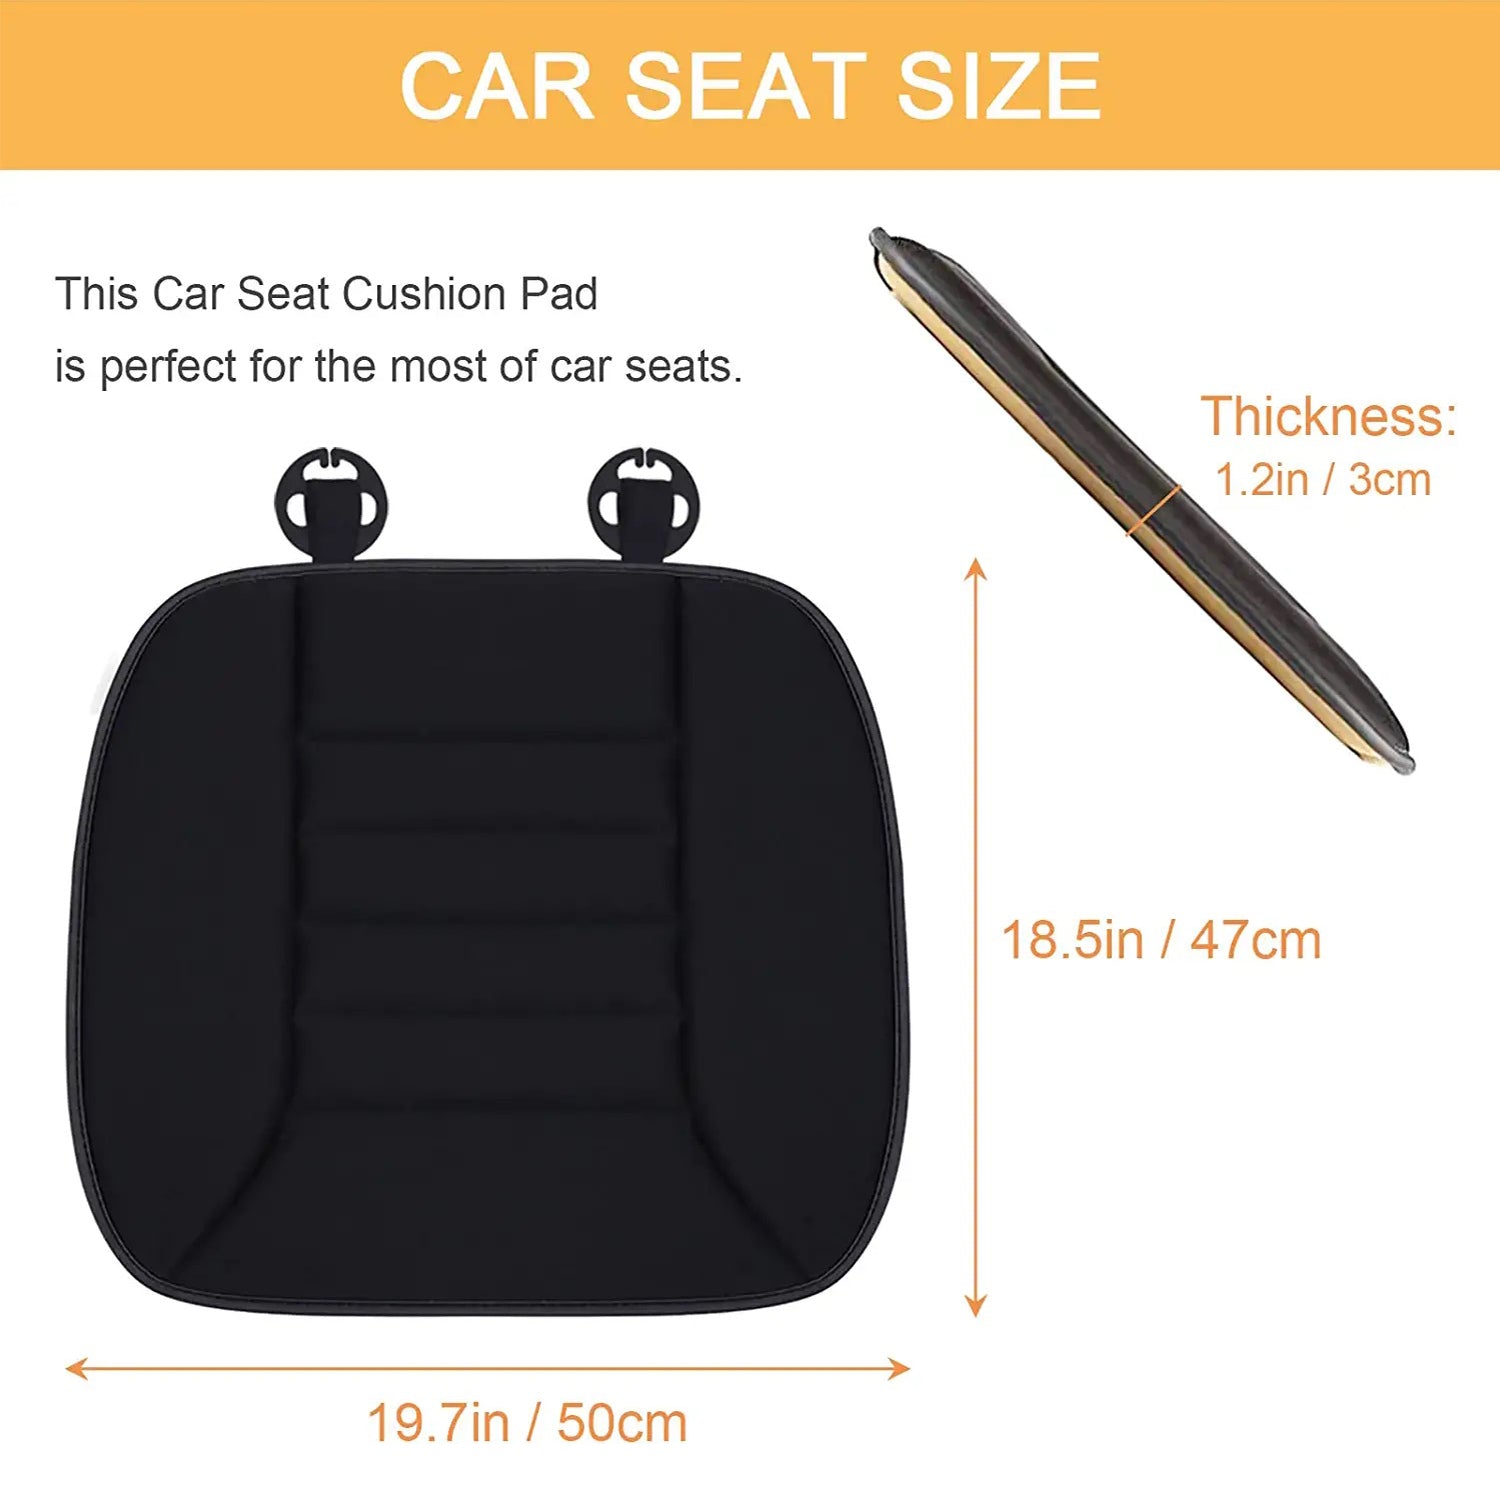 Car Seat Cushion with 1.2inch Comfort Memory Foam, Custom-Fit For Car, Seat Cushion for Car and Office Chair DLLE247